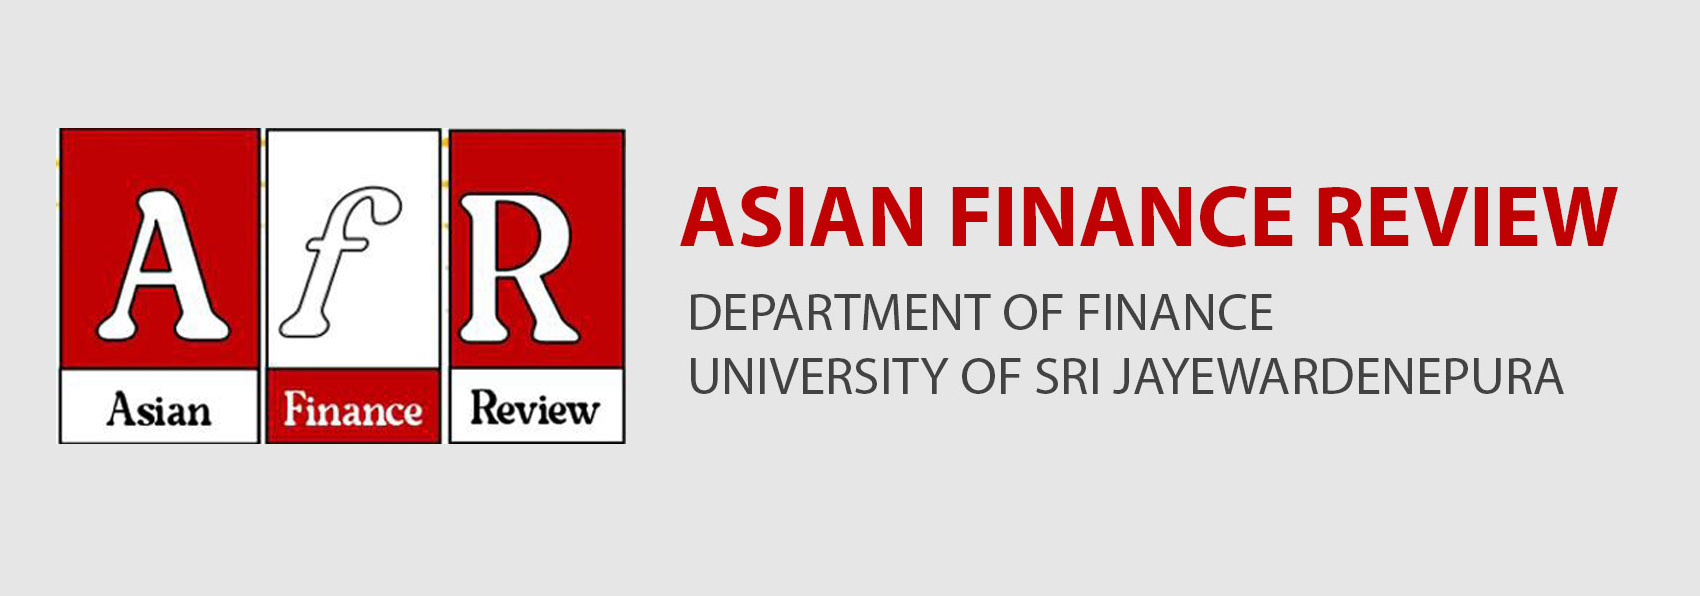 Asian Finance Review